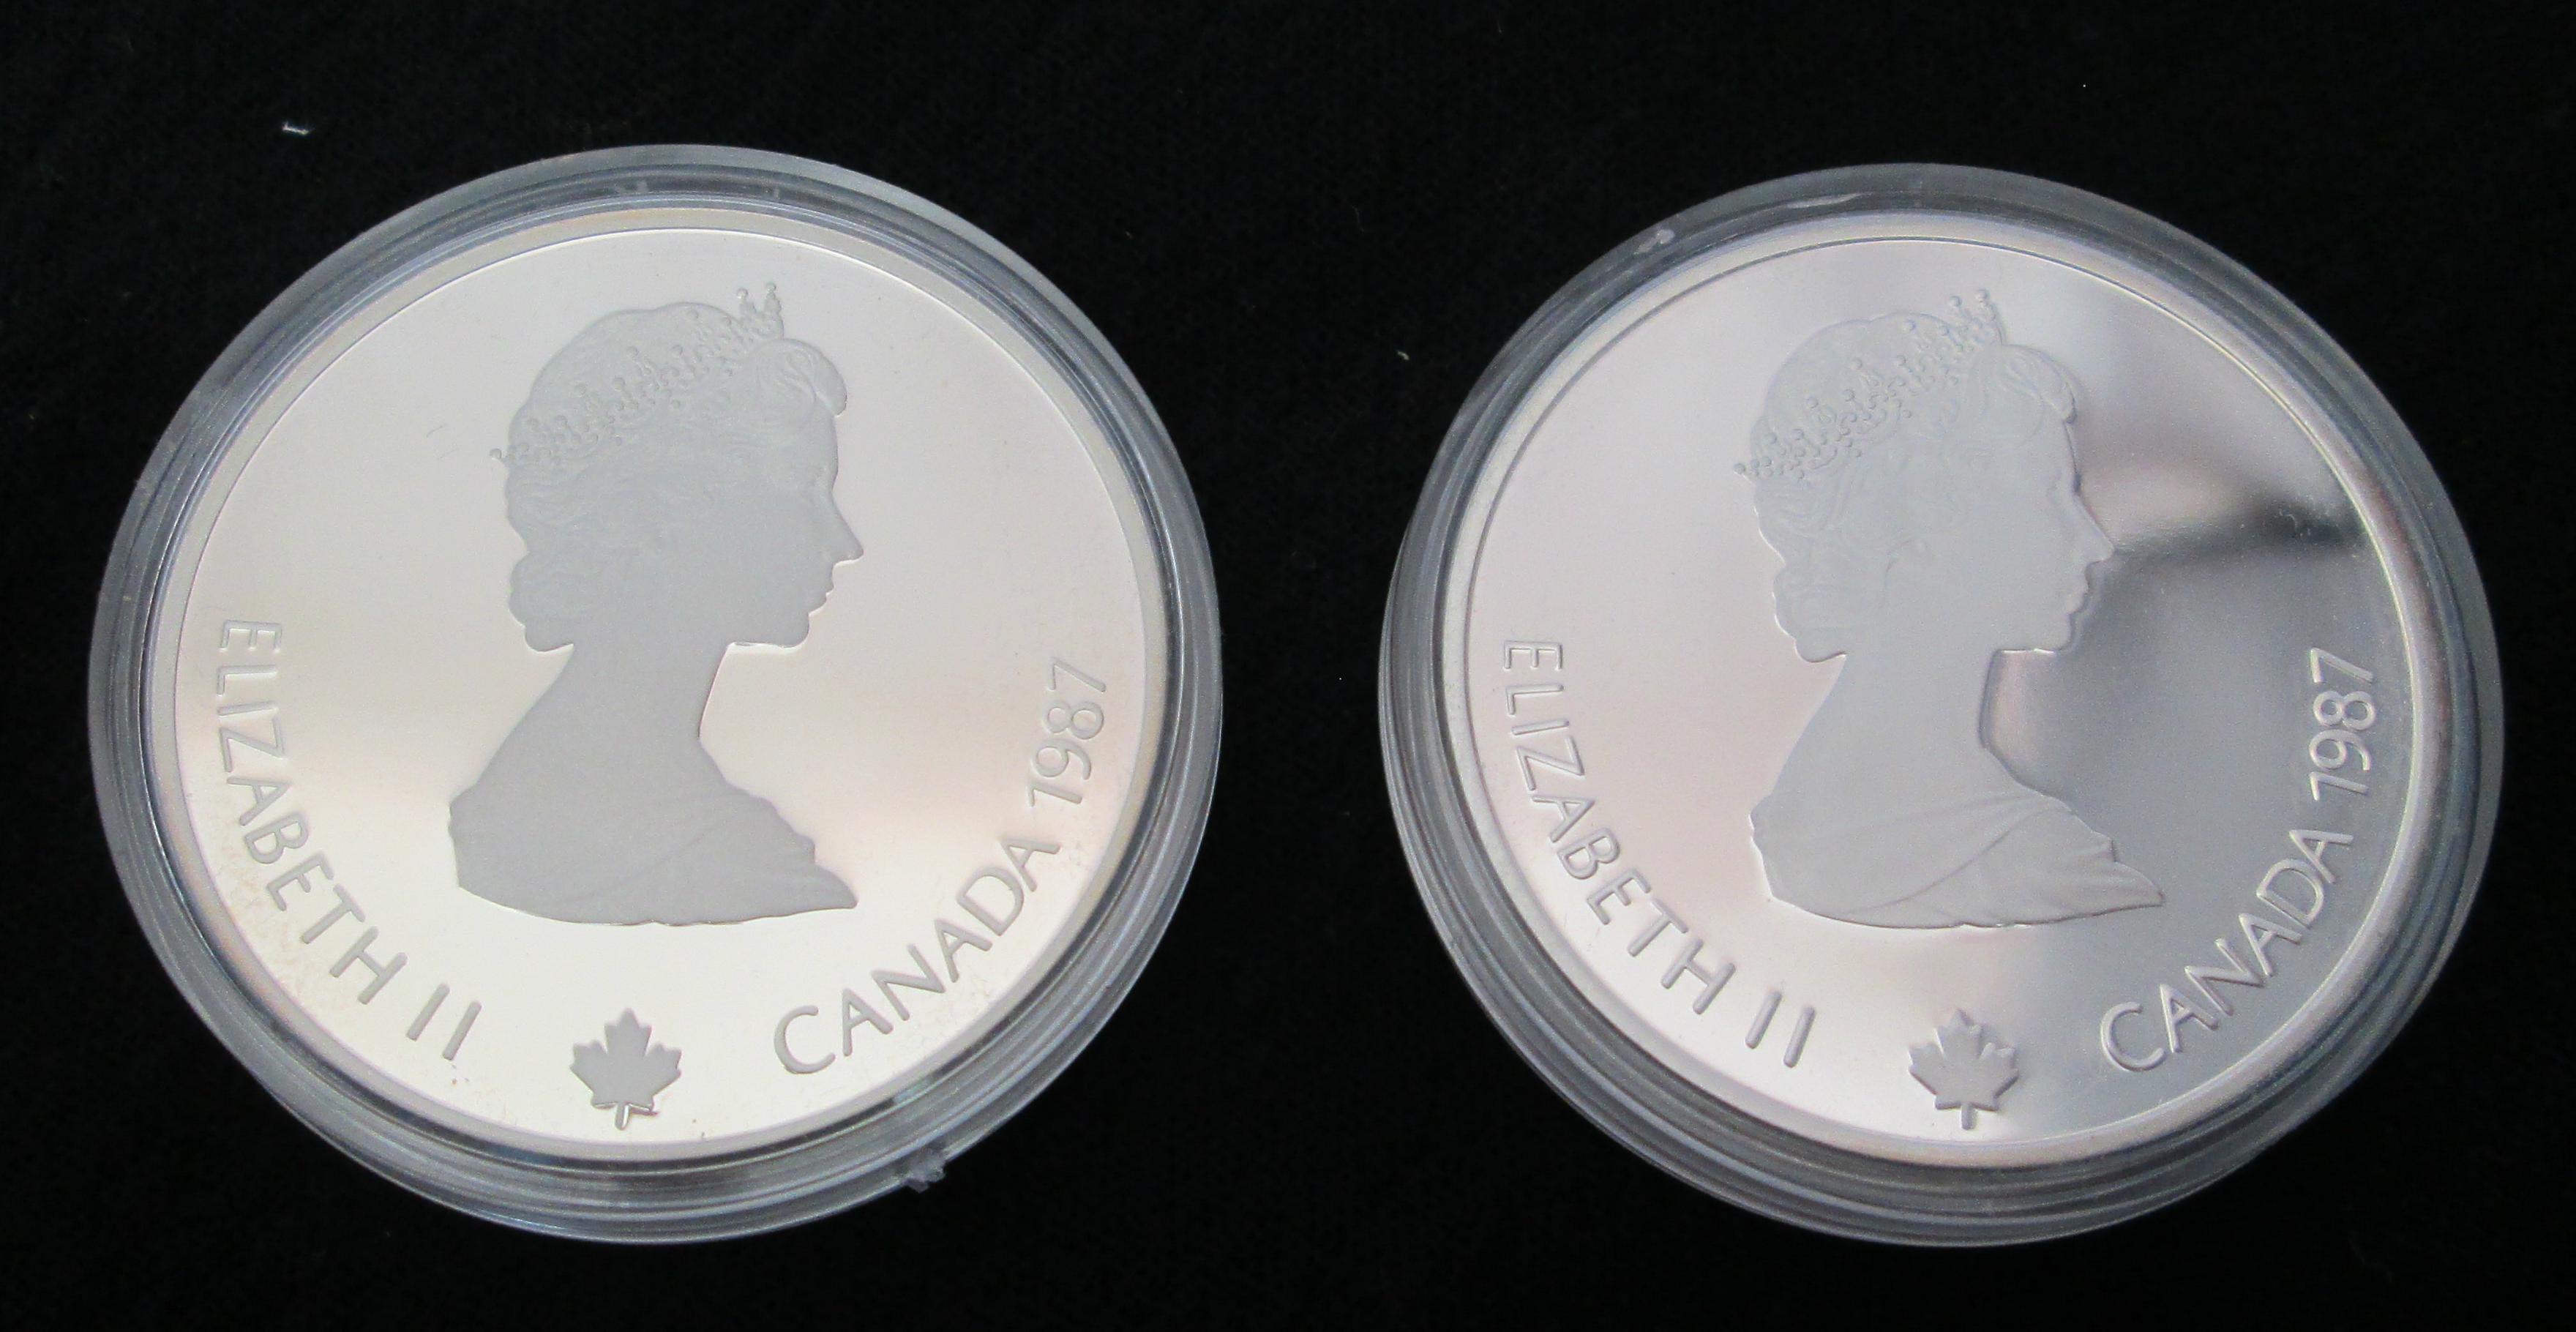 Value of 2 Coins $20 Silver Calgary Winter Olympics Set (Royal Canadian